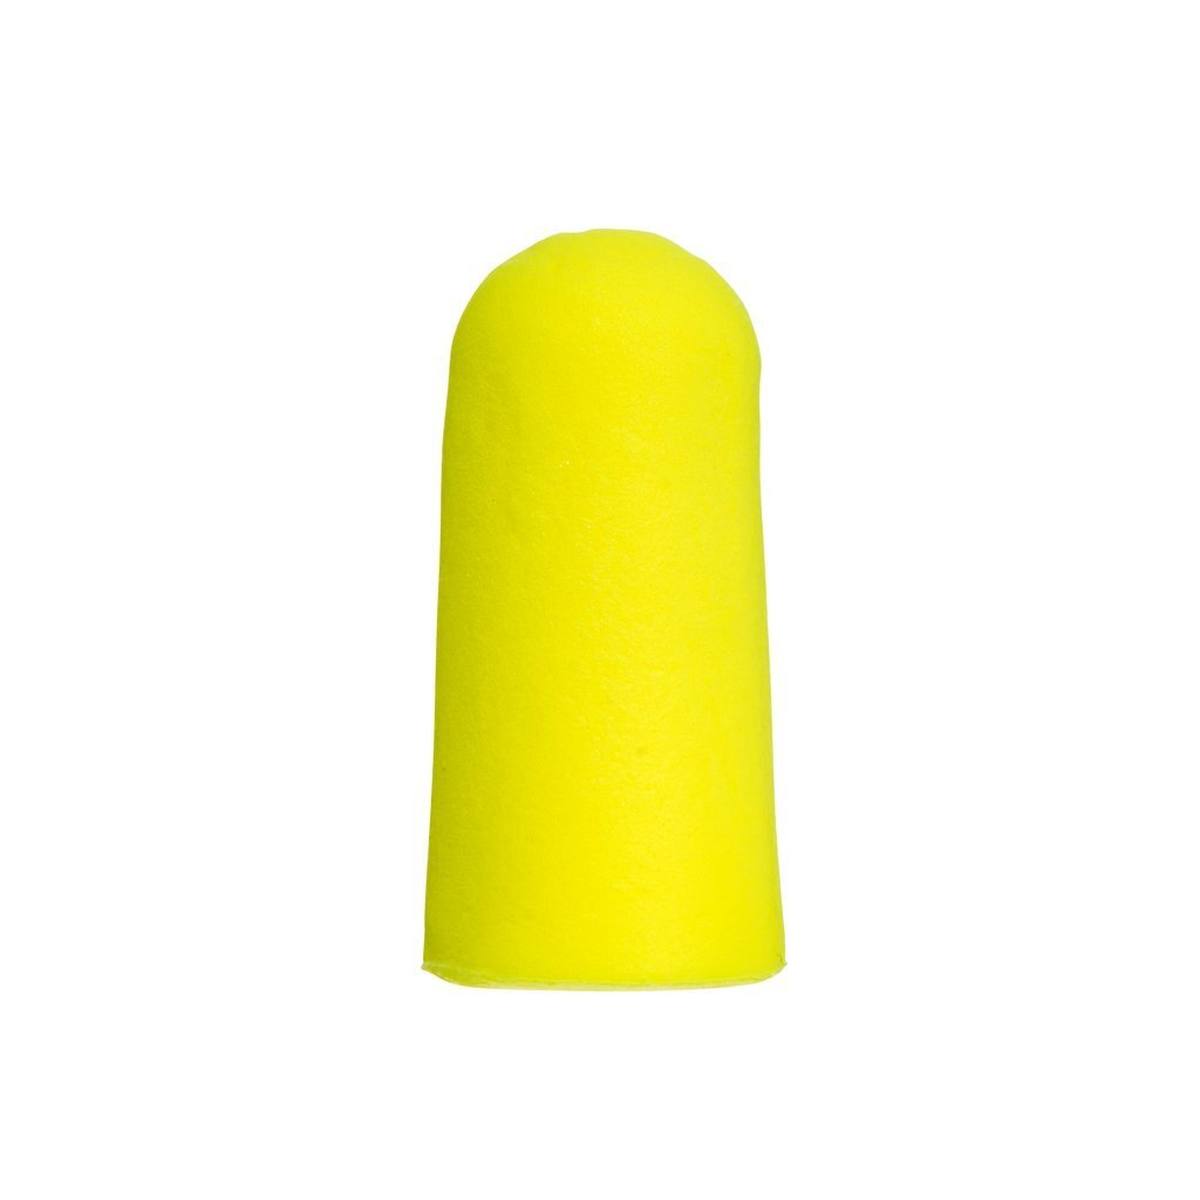 3M E-A-R Soft Yellow Neons, polyurethane, flexible and comfortable, in pairs in polybag, neon yellow, SNR=36 dB, ES01001